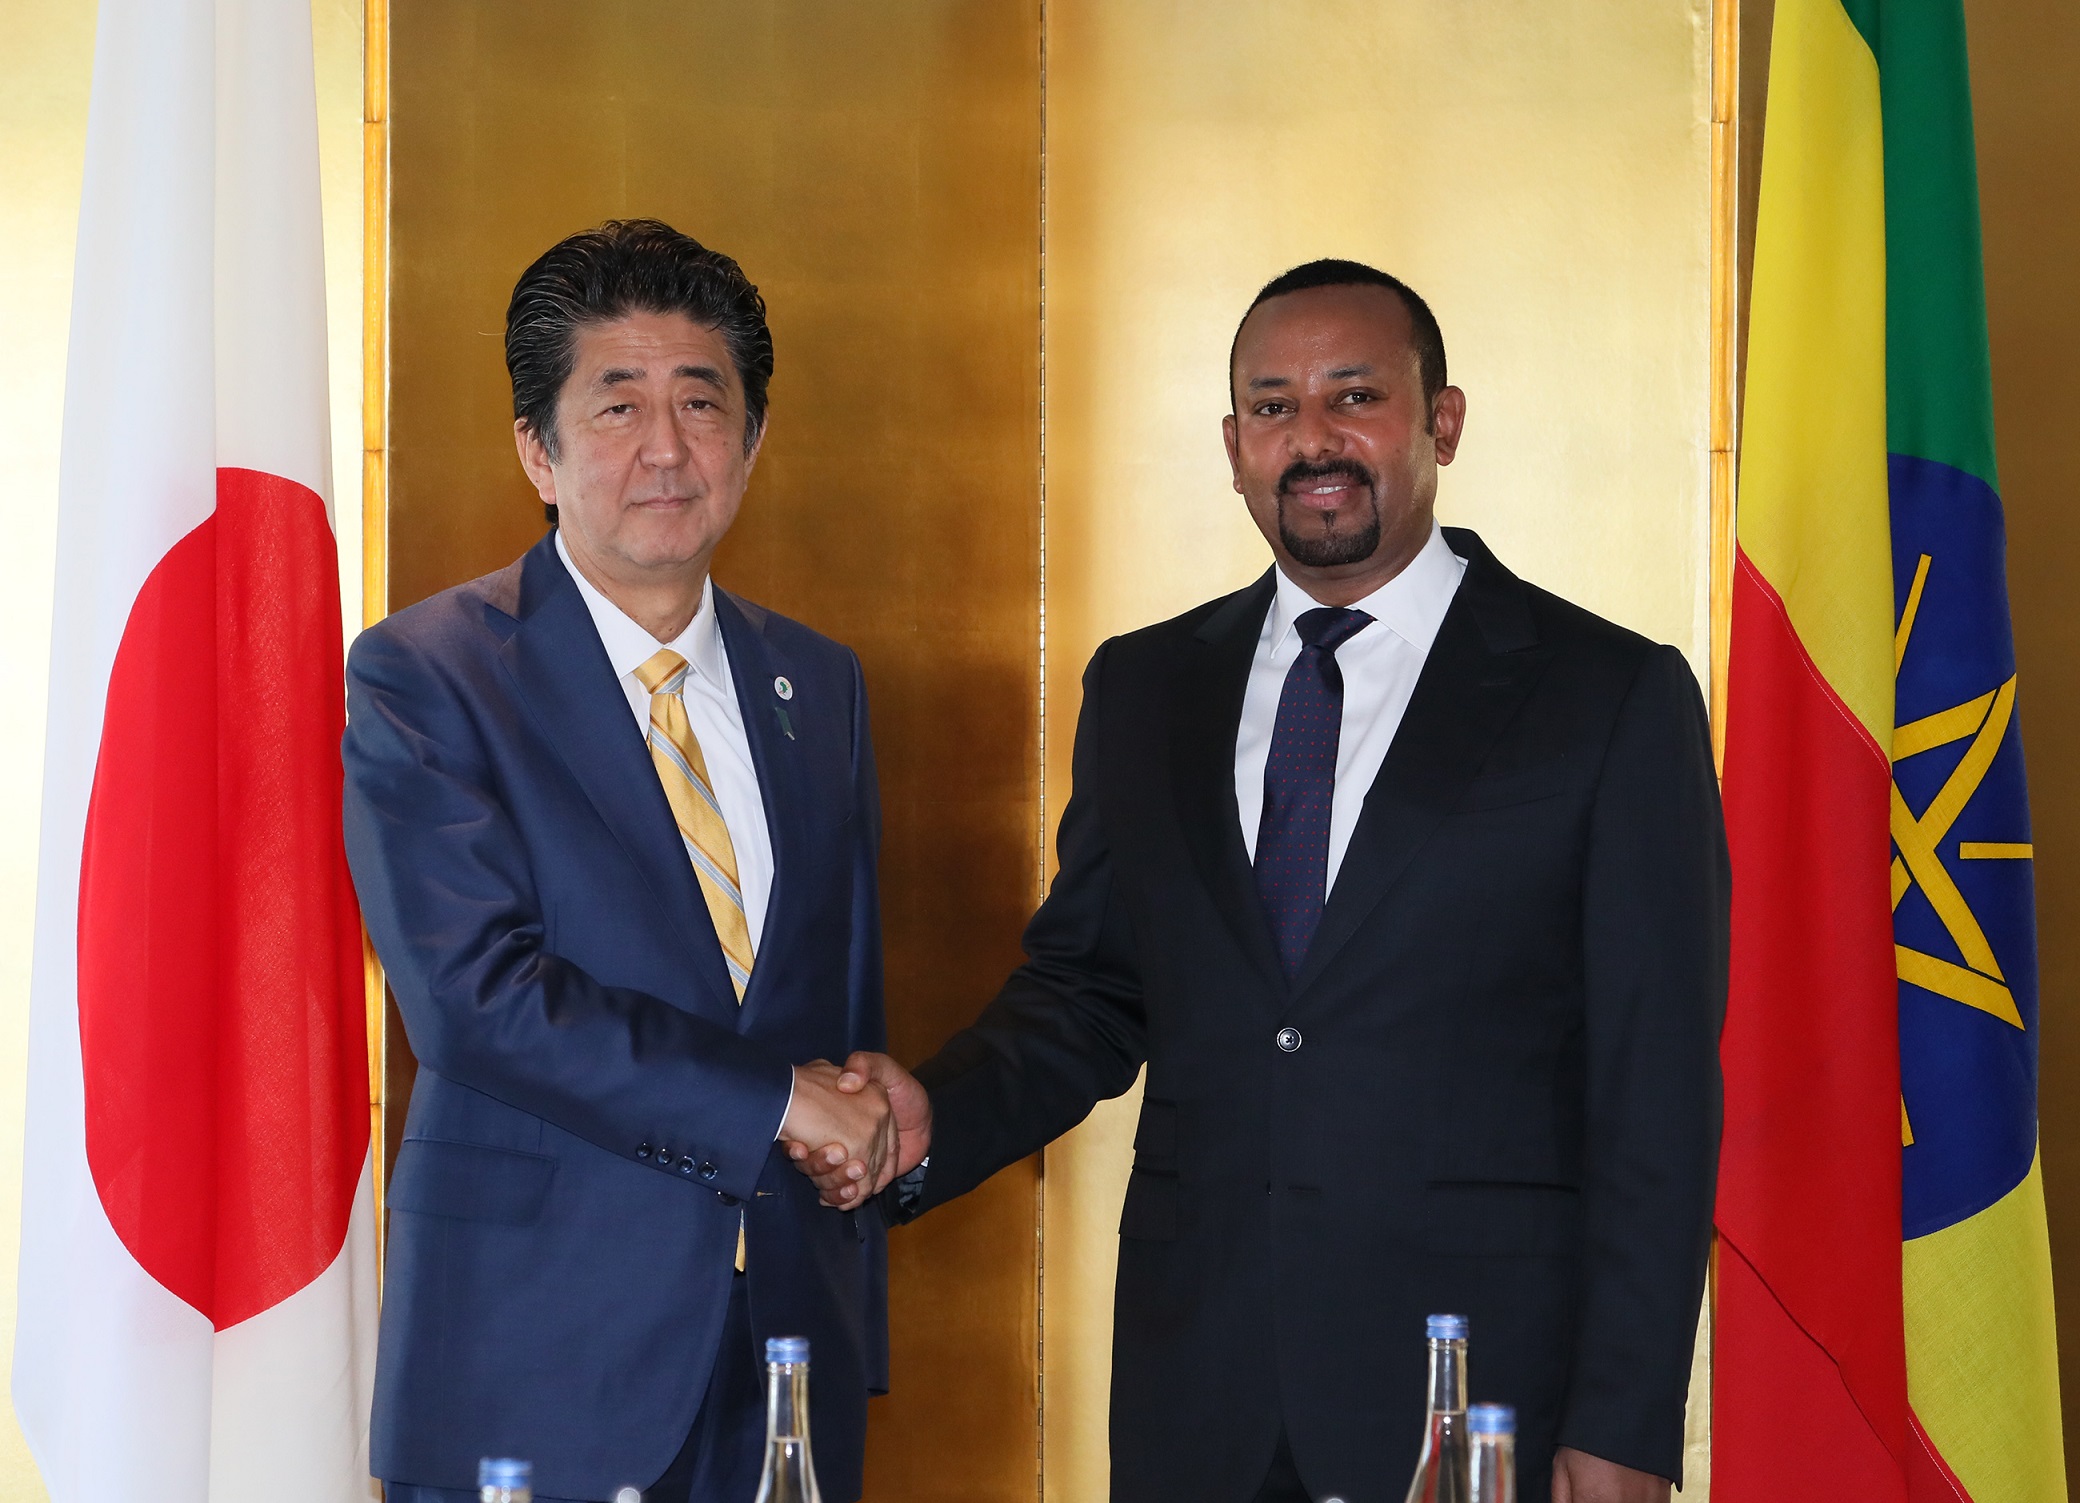 Photograph of the Japan-Ethiopia Summit Meeting